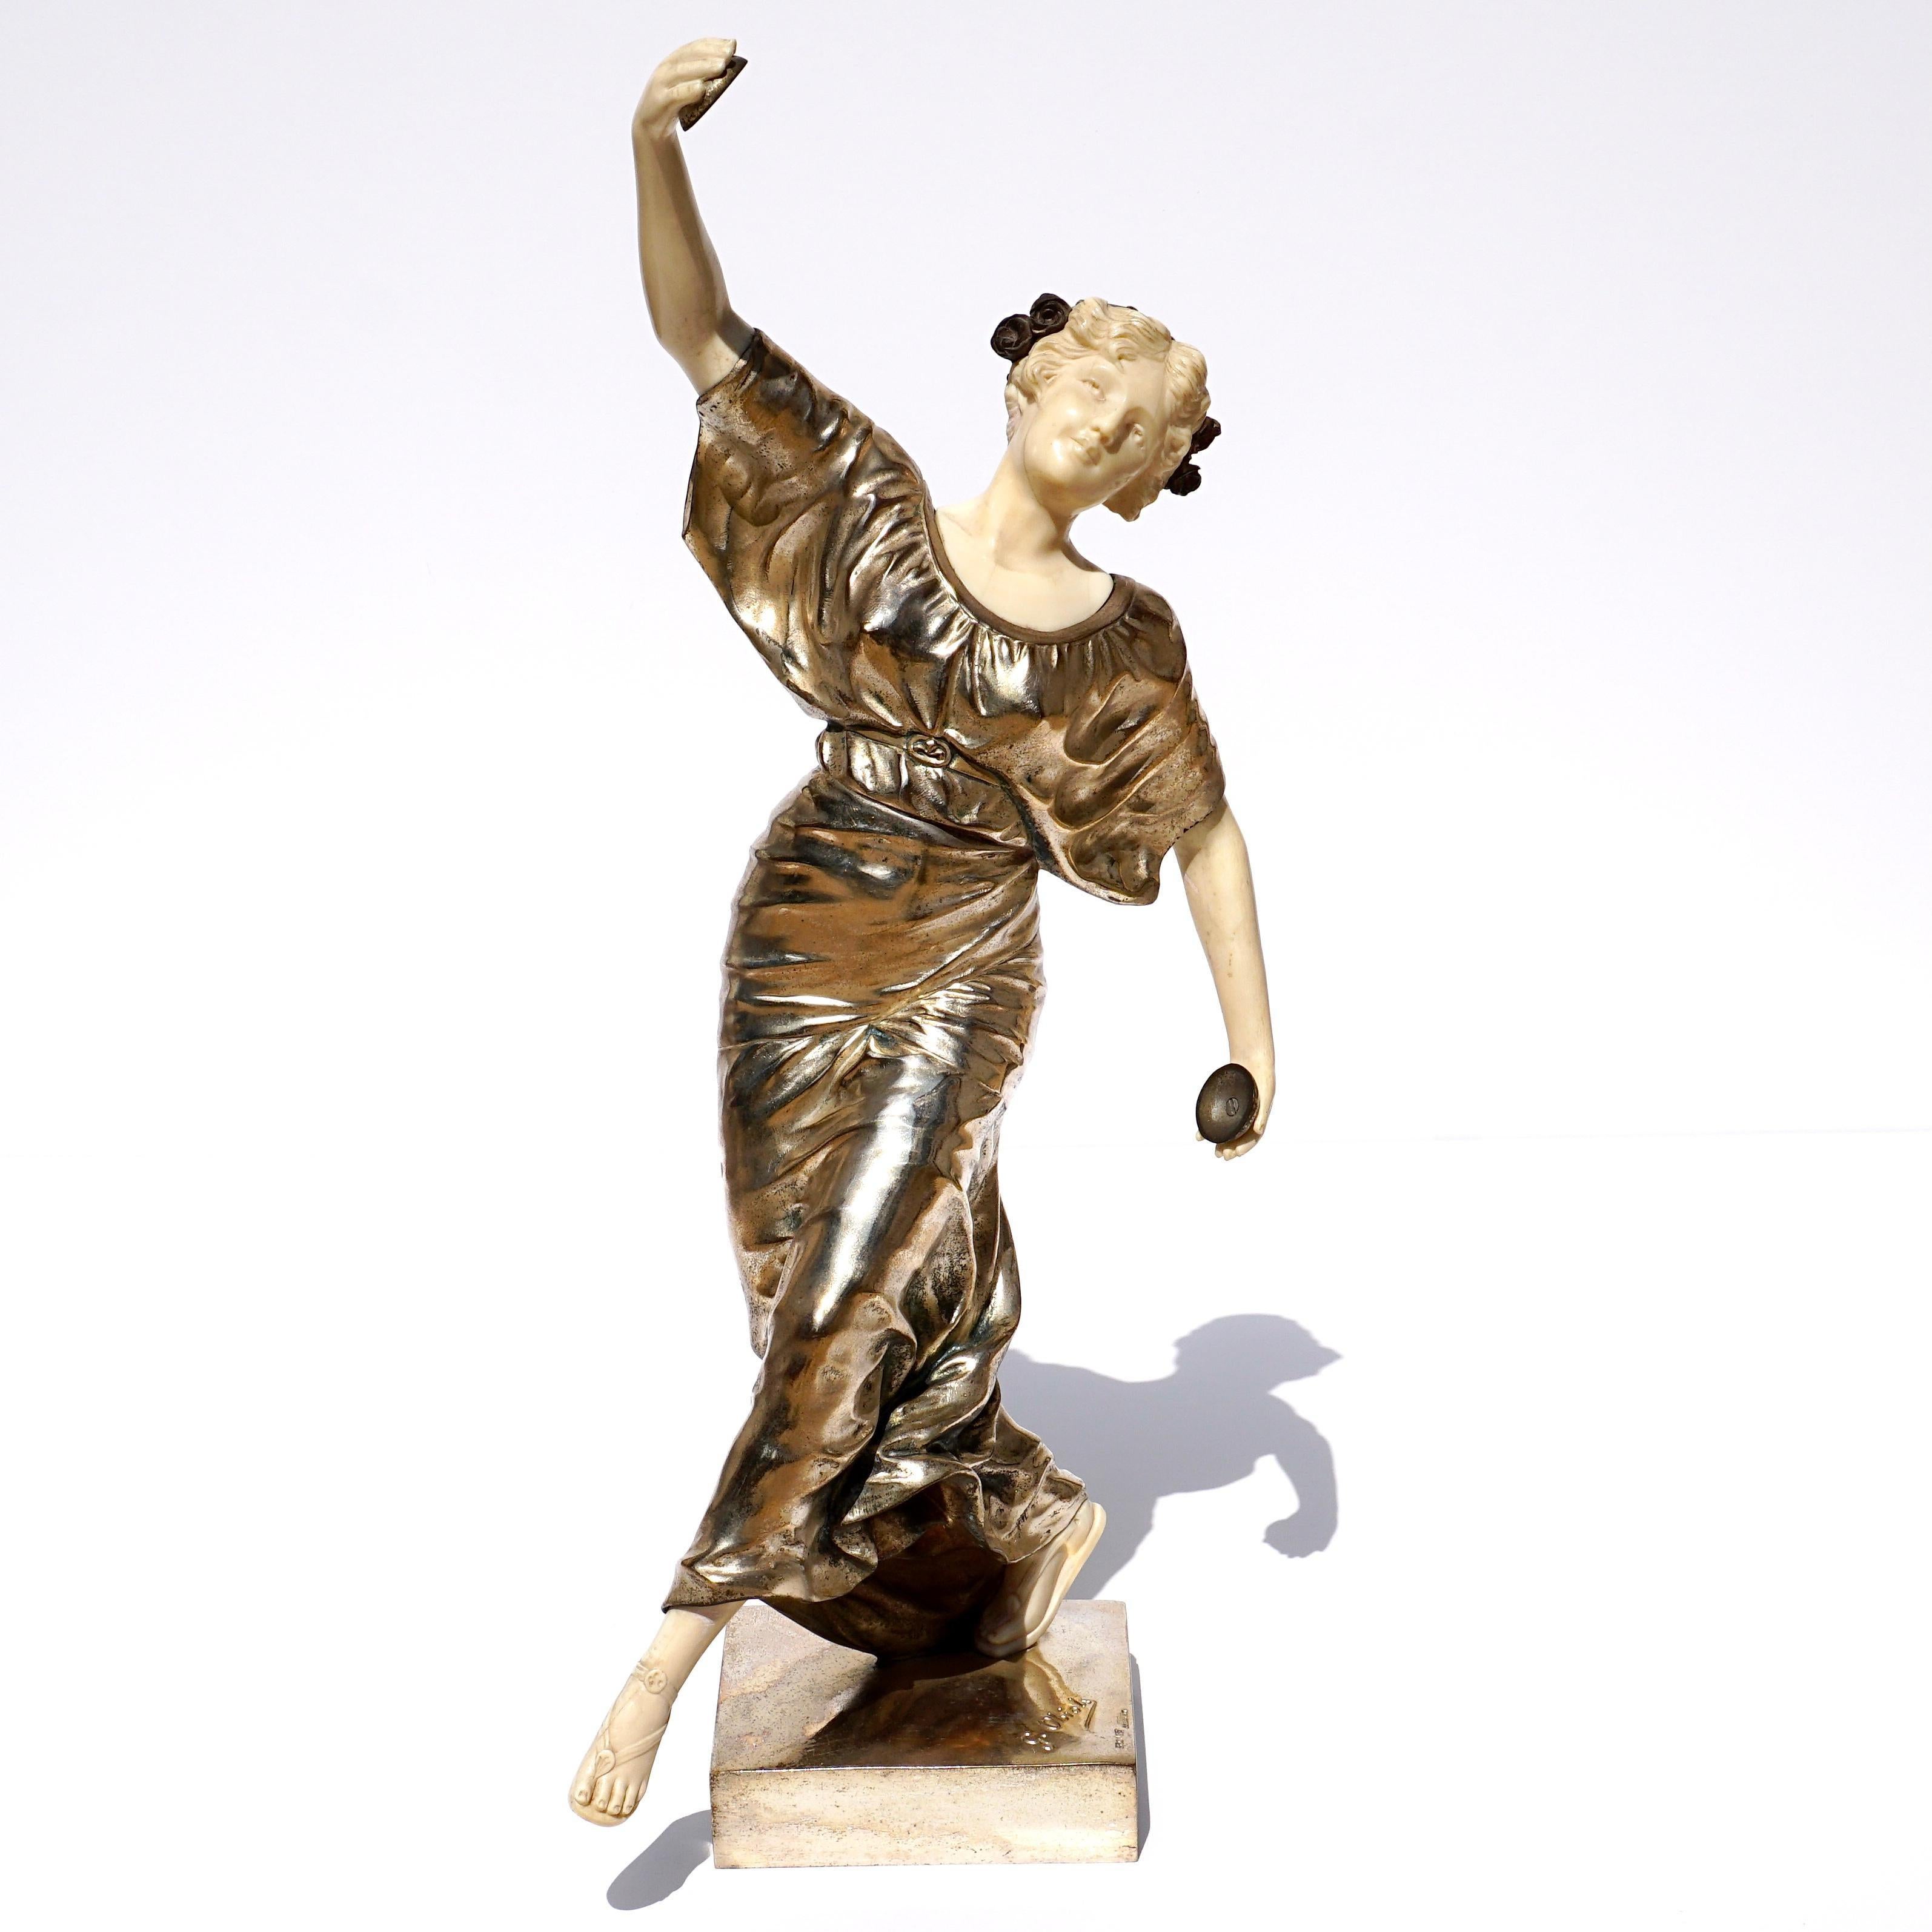 Gustavo Obiols Delgado (1858-1910) – Spanish sculptor
Signed in the cast ‘G. Obiols’

Spanish Dancer with Castanetas; Silvered bronze and finely carved bone

No damage or repairs.

Height: 18.5 

Cold Painted Silvery with traces of Blue and red